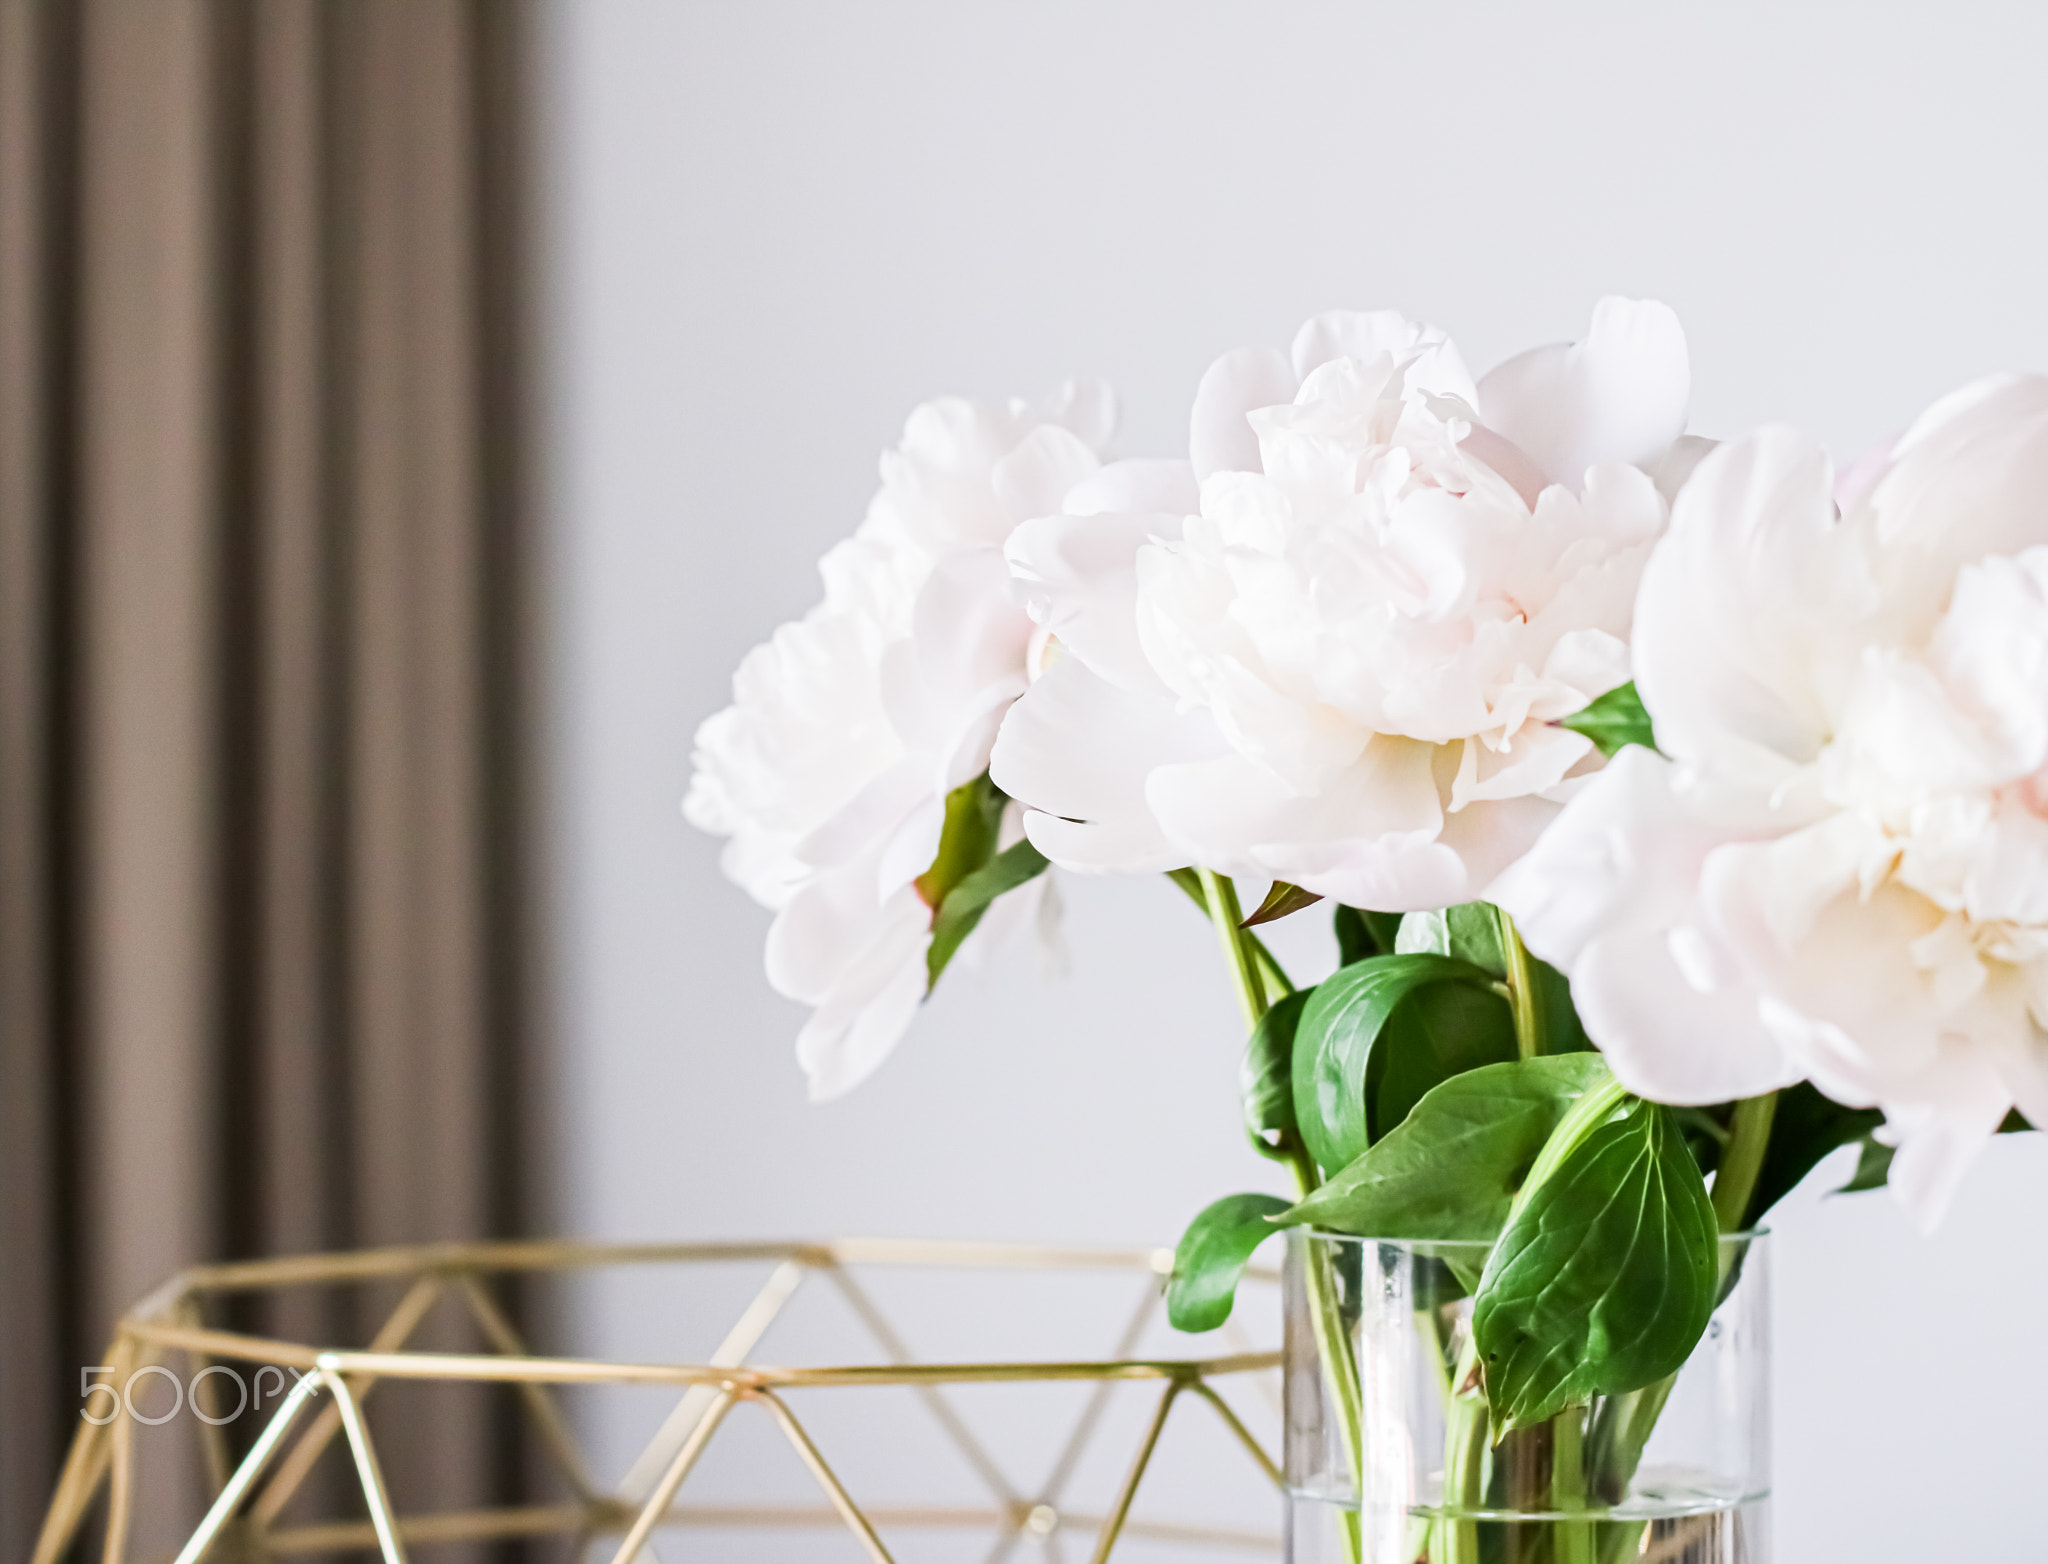 Chic bouquet of peony flowers in vase as home decor idea, luxury